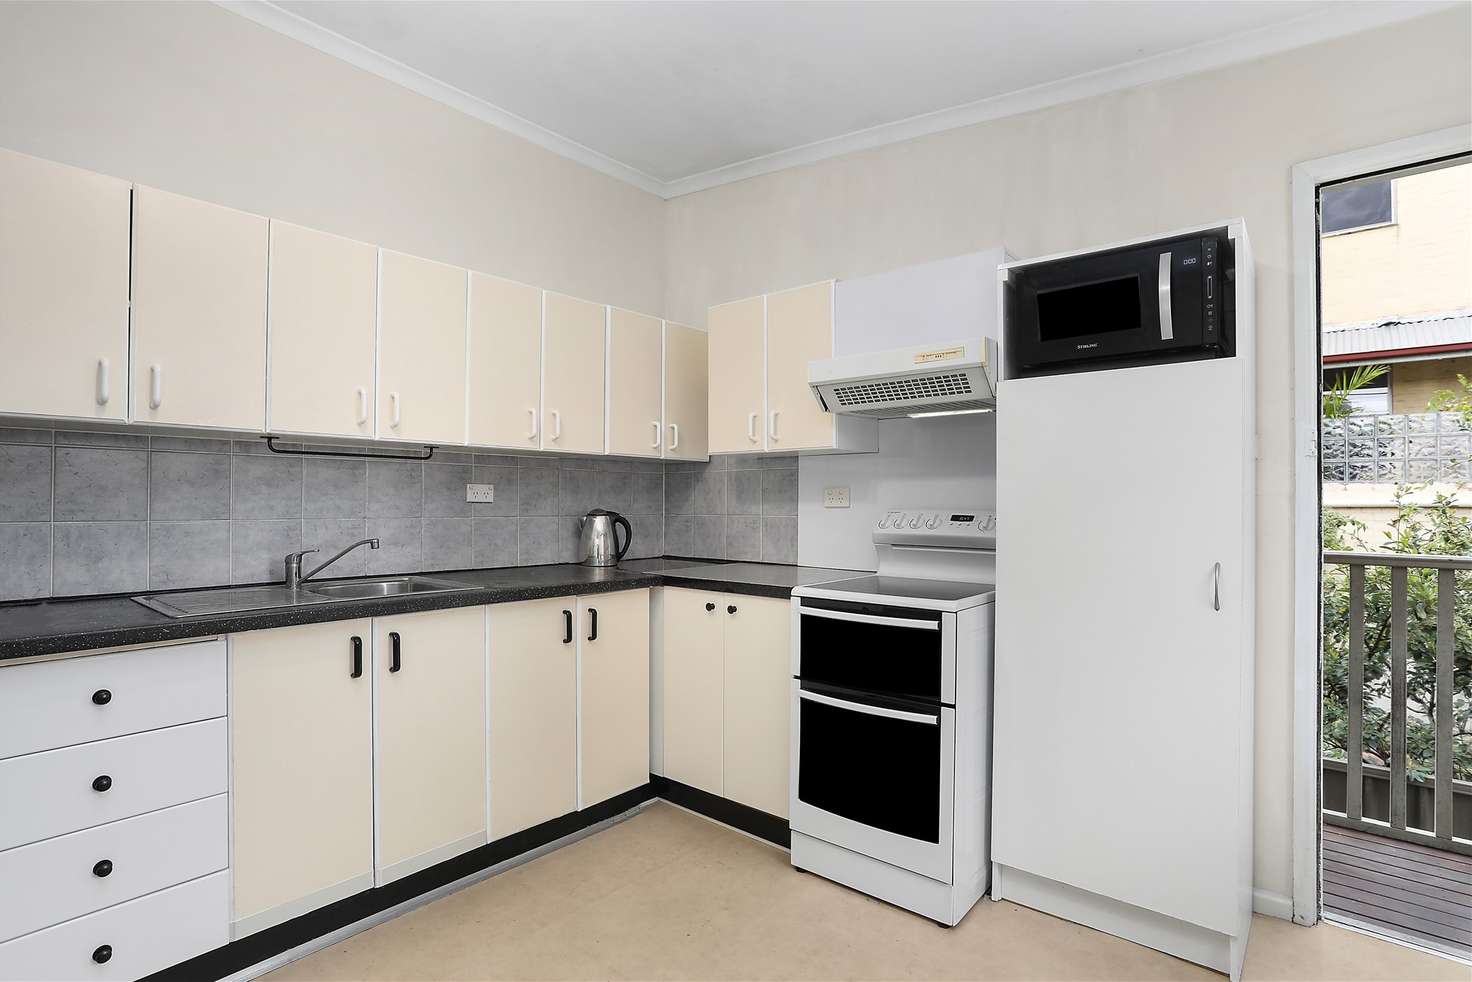 Main view of Homely house listing, 47 Kensington Rd, Kensington NSW 2033